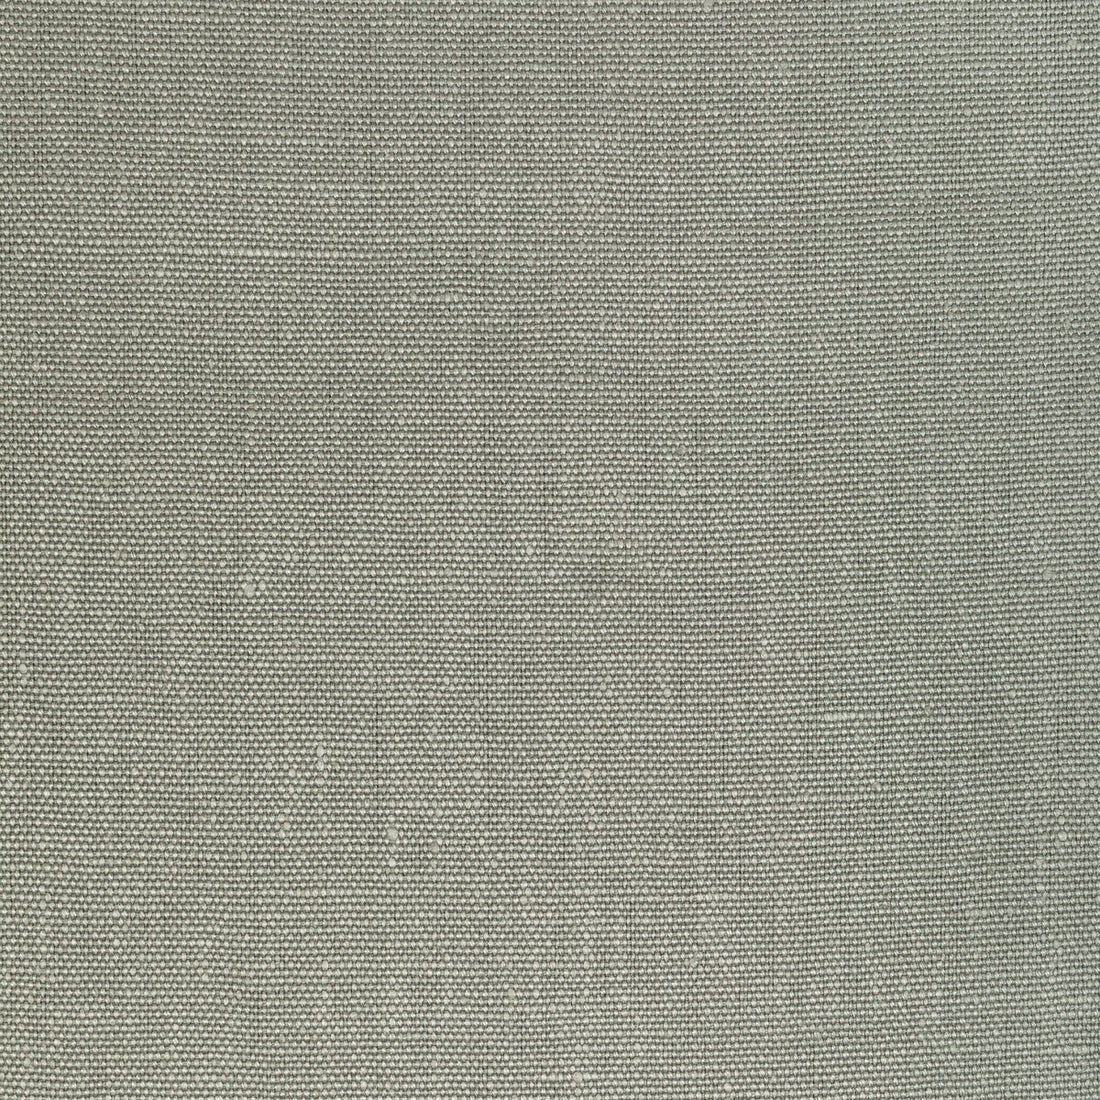 Kravet Basics fabric in 32260-30 color - pattern 32260.30.0 - by Kravet Basics in the Perfect Plains collection